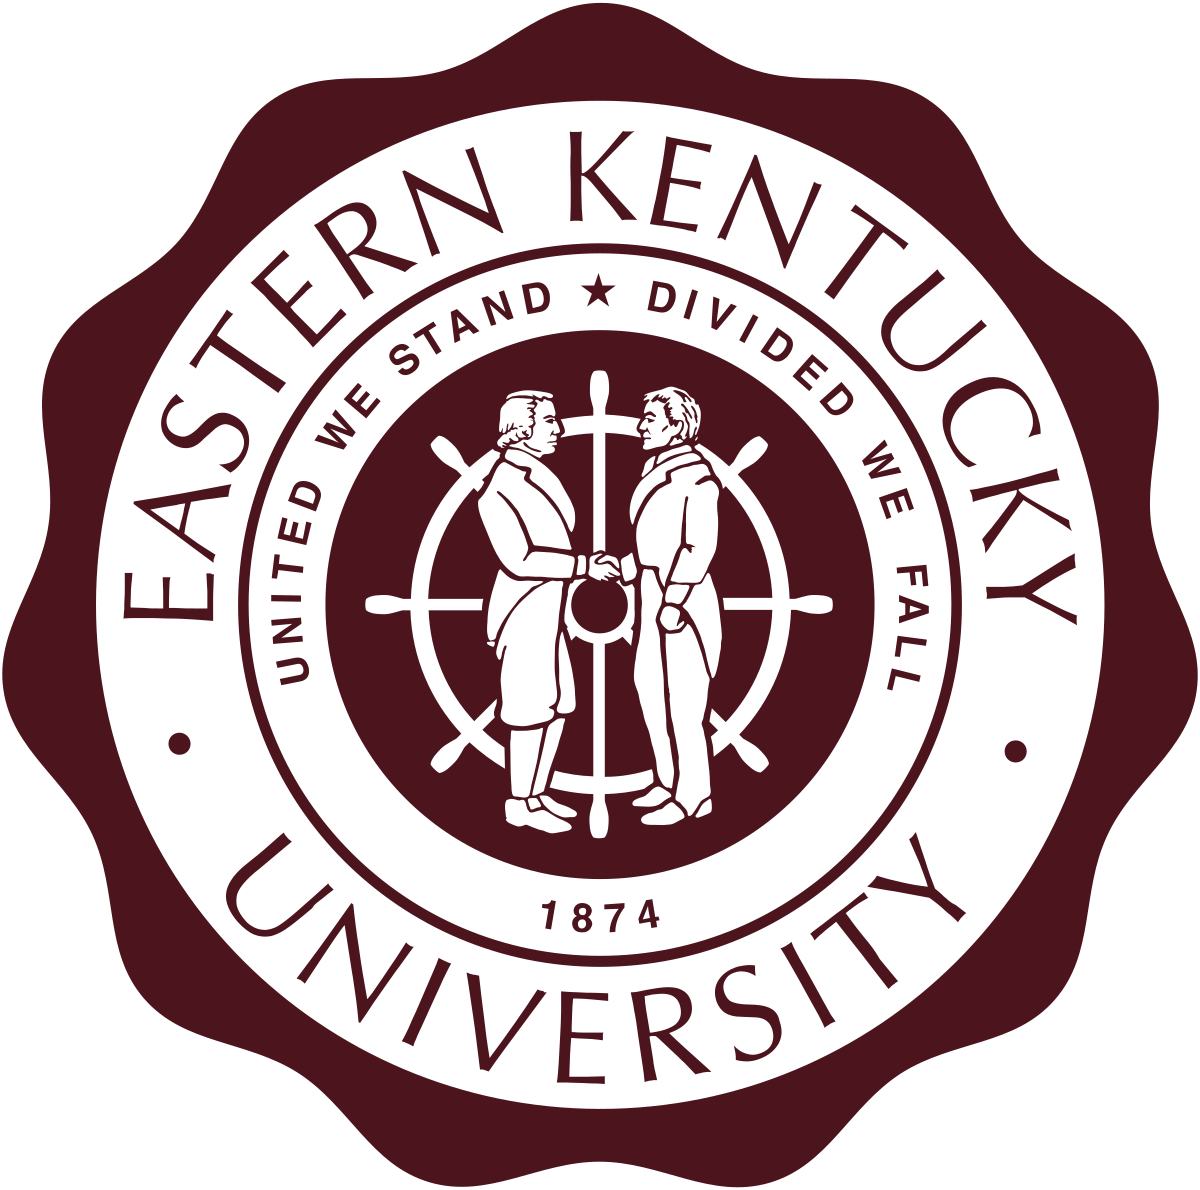 A logo of Eastern Kentucky University for our school profile